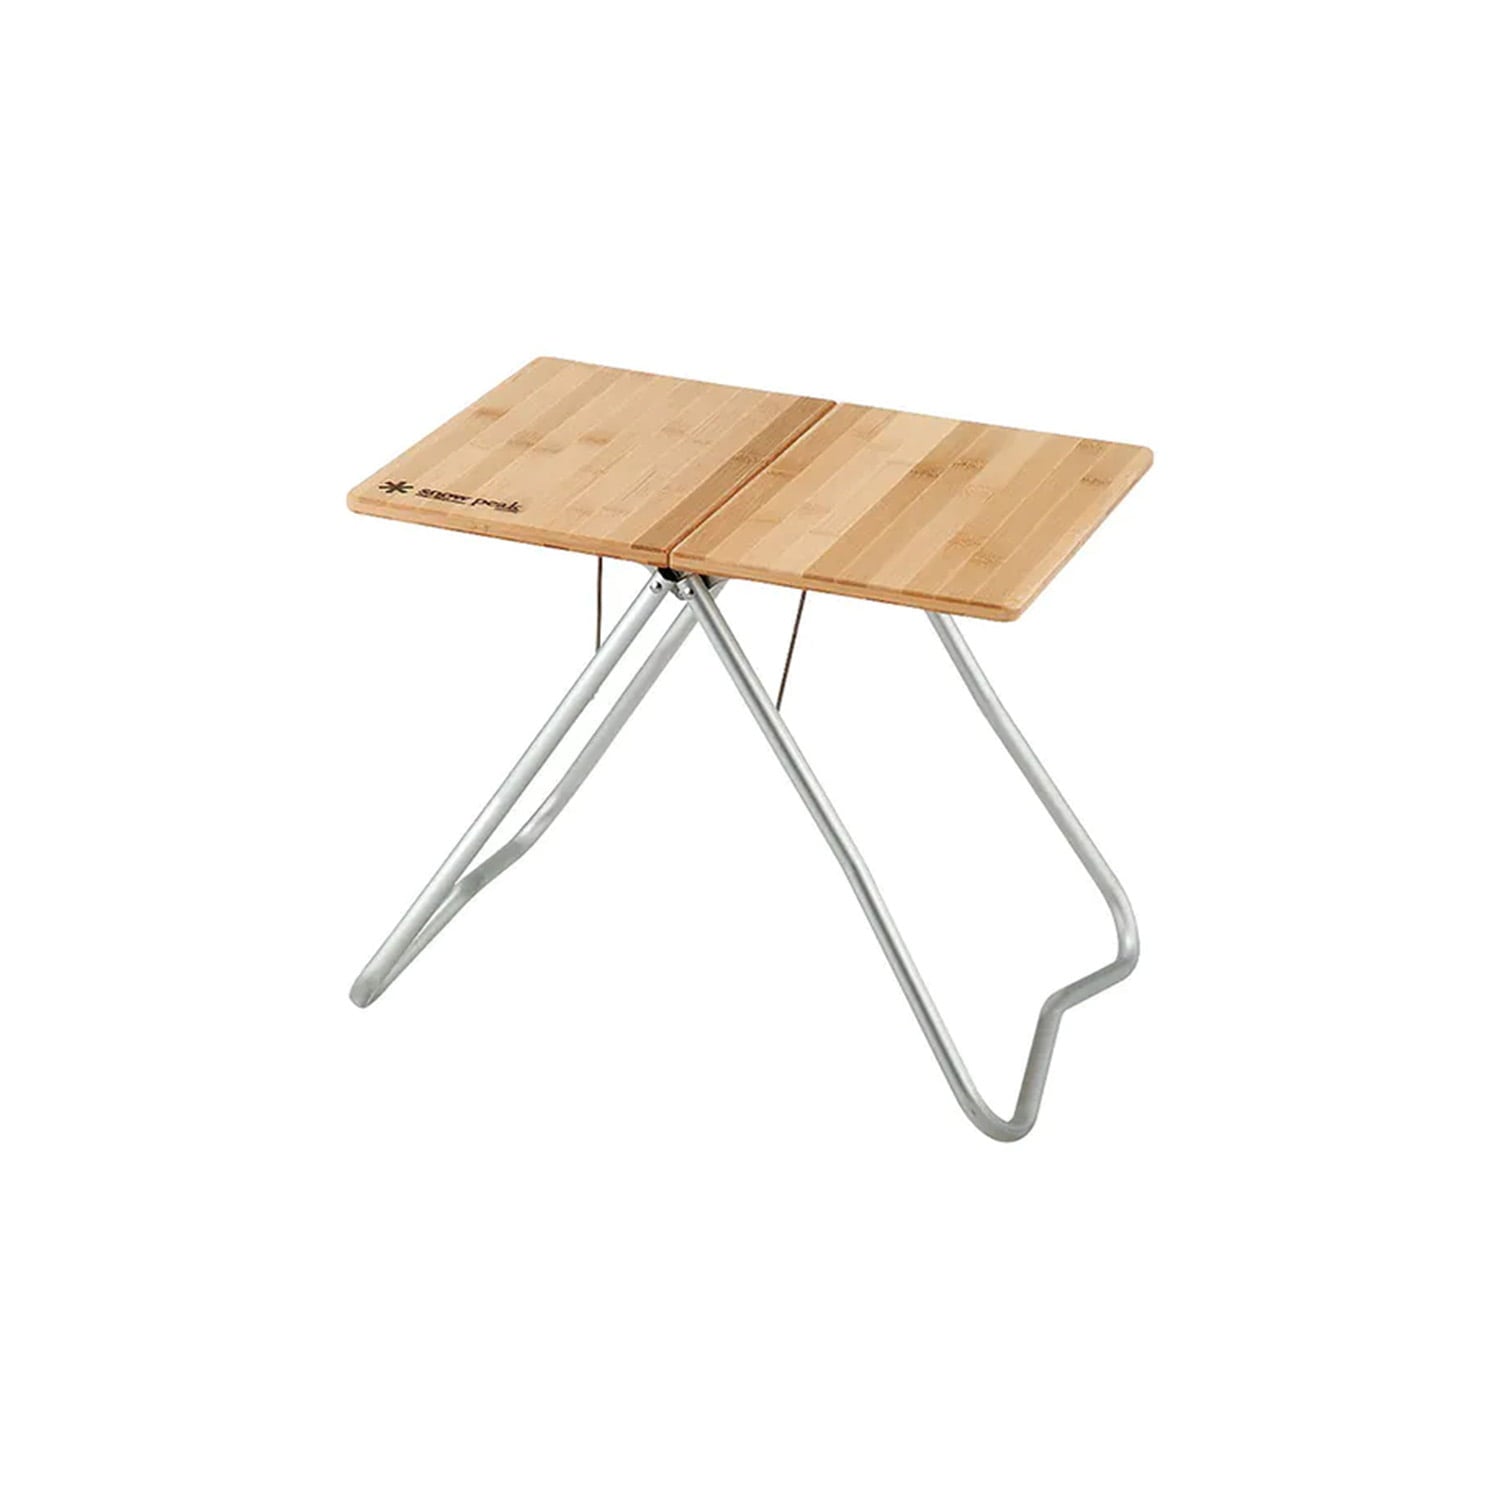 Snow Peak My Table Bamboo Top | ADVENTURE CURATED